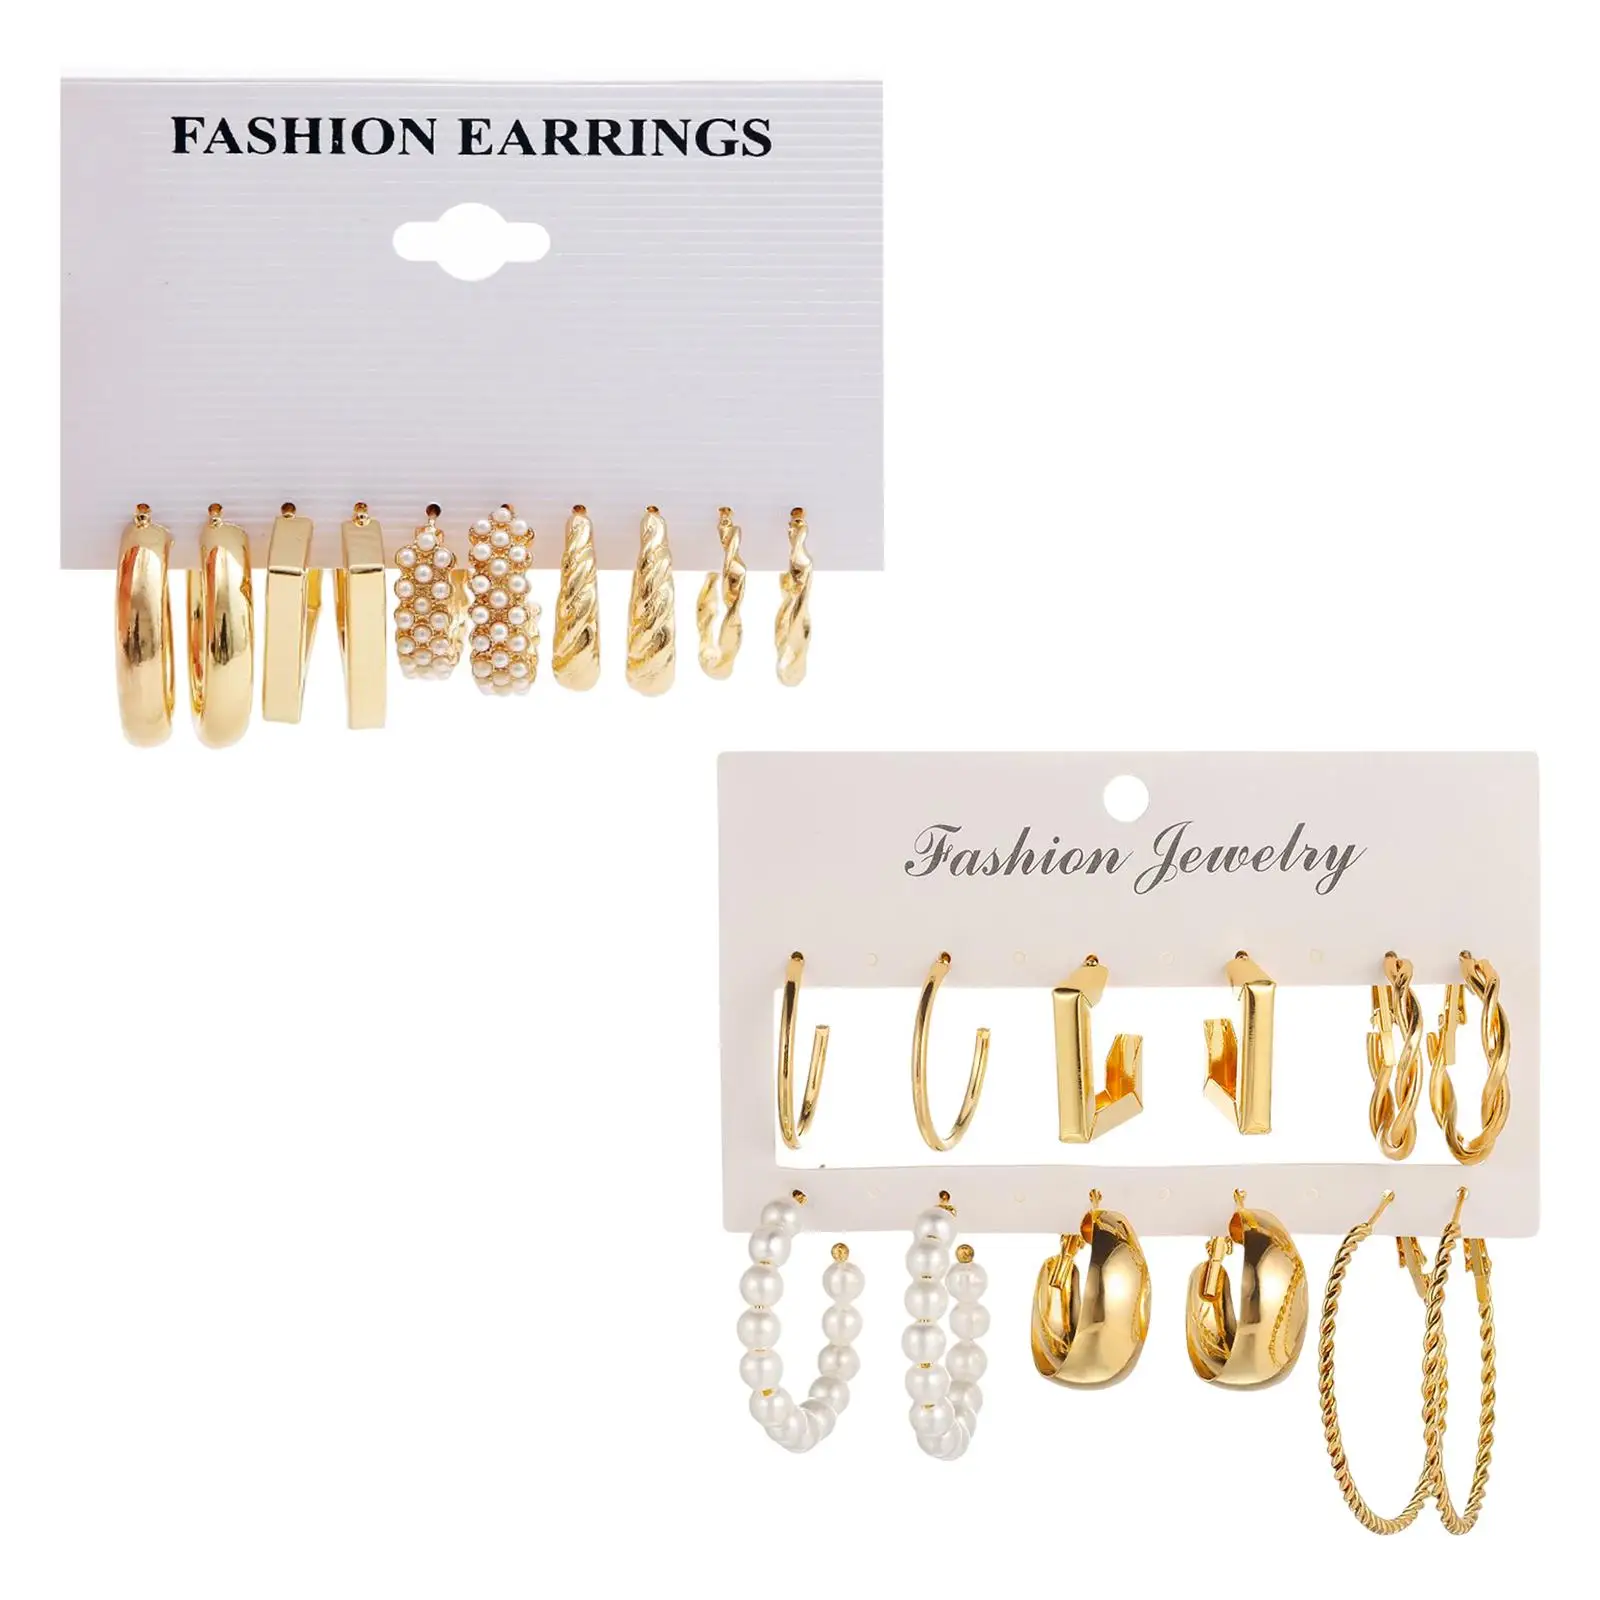 Girls Metal Earrings Set for Receptions, Work Daily wearing Accessory to Every Outfit Party Jewelry Stylish Different Styles